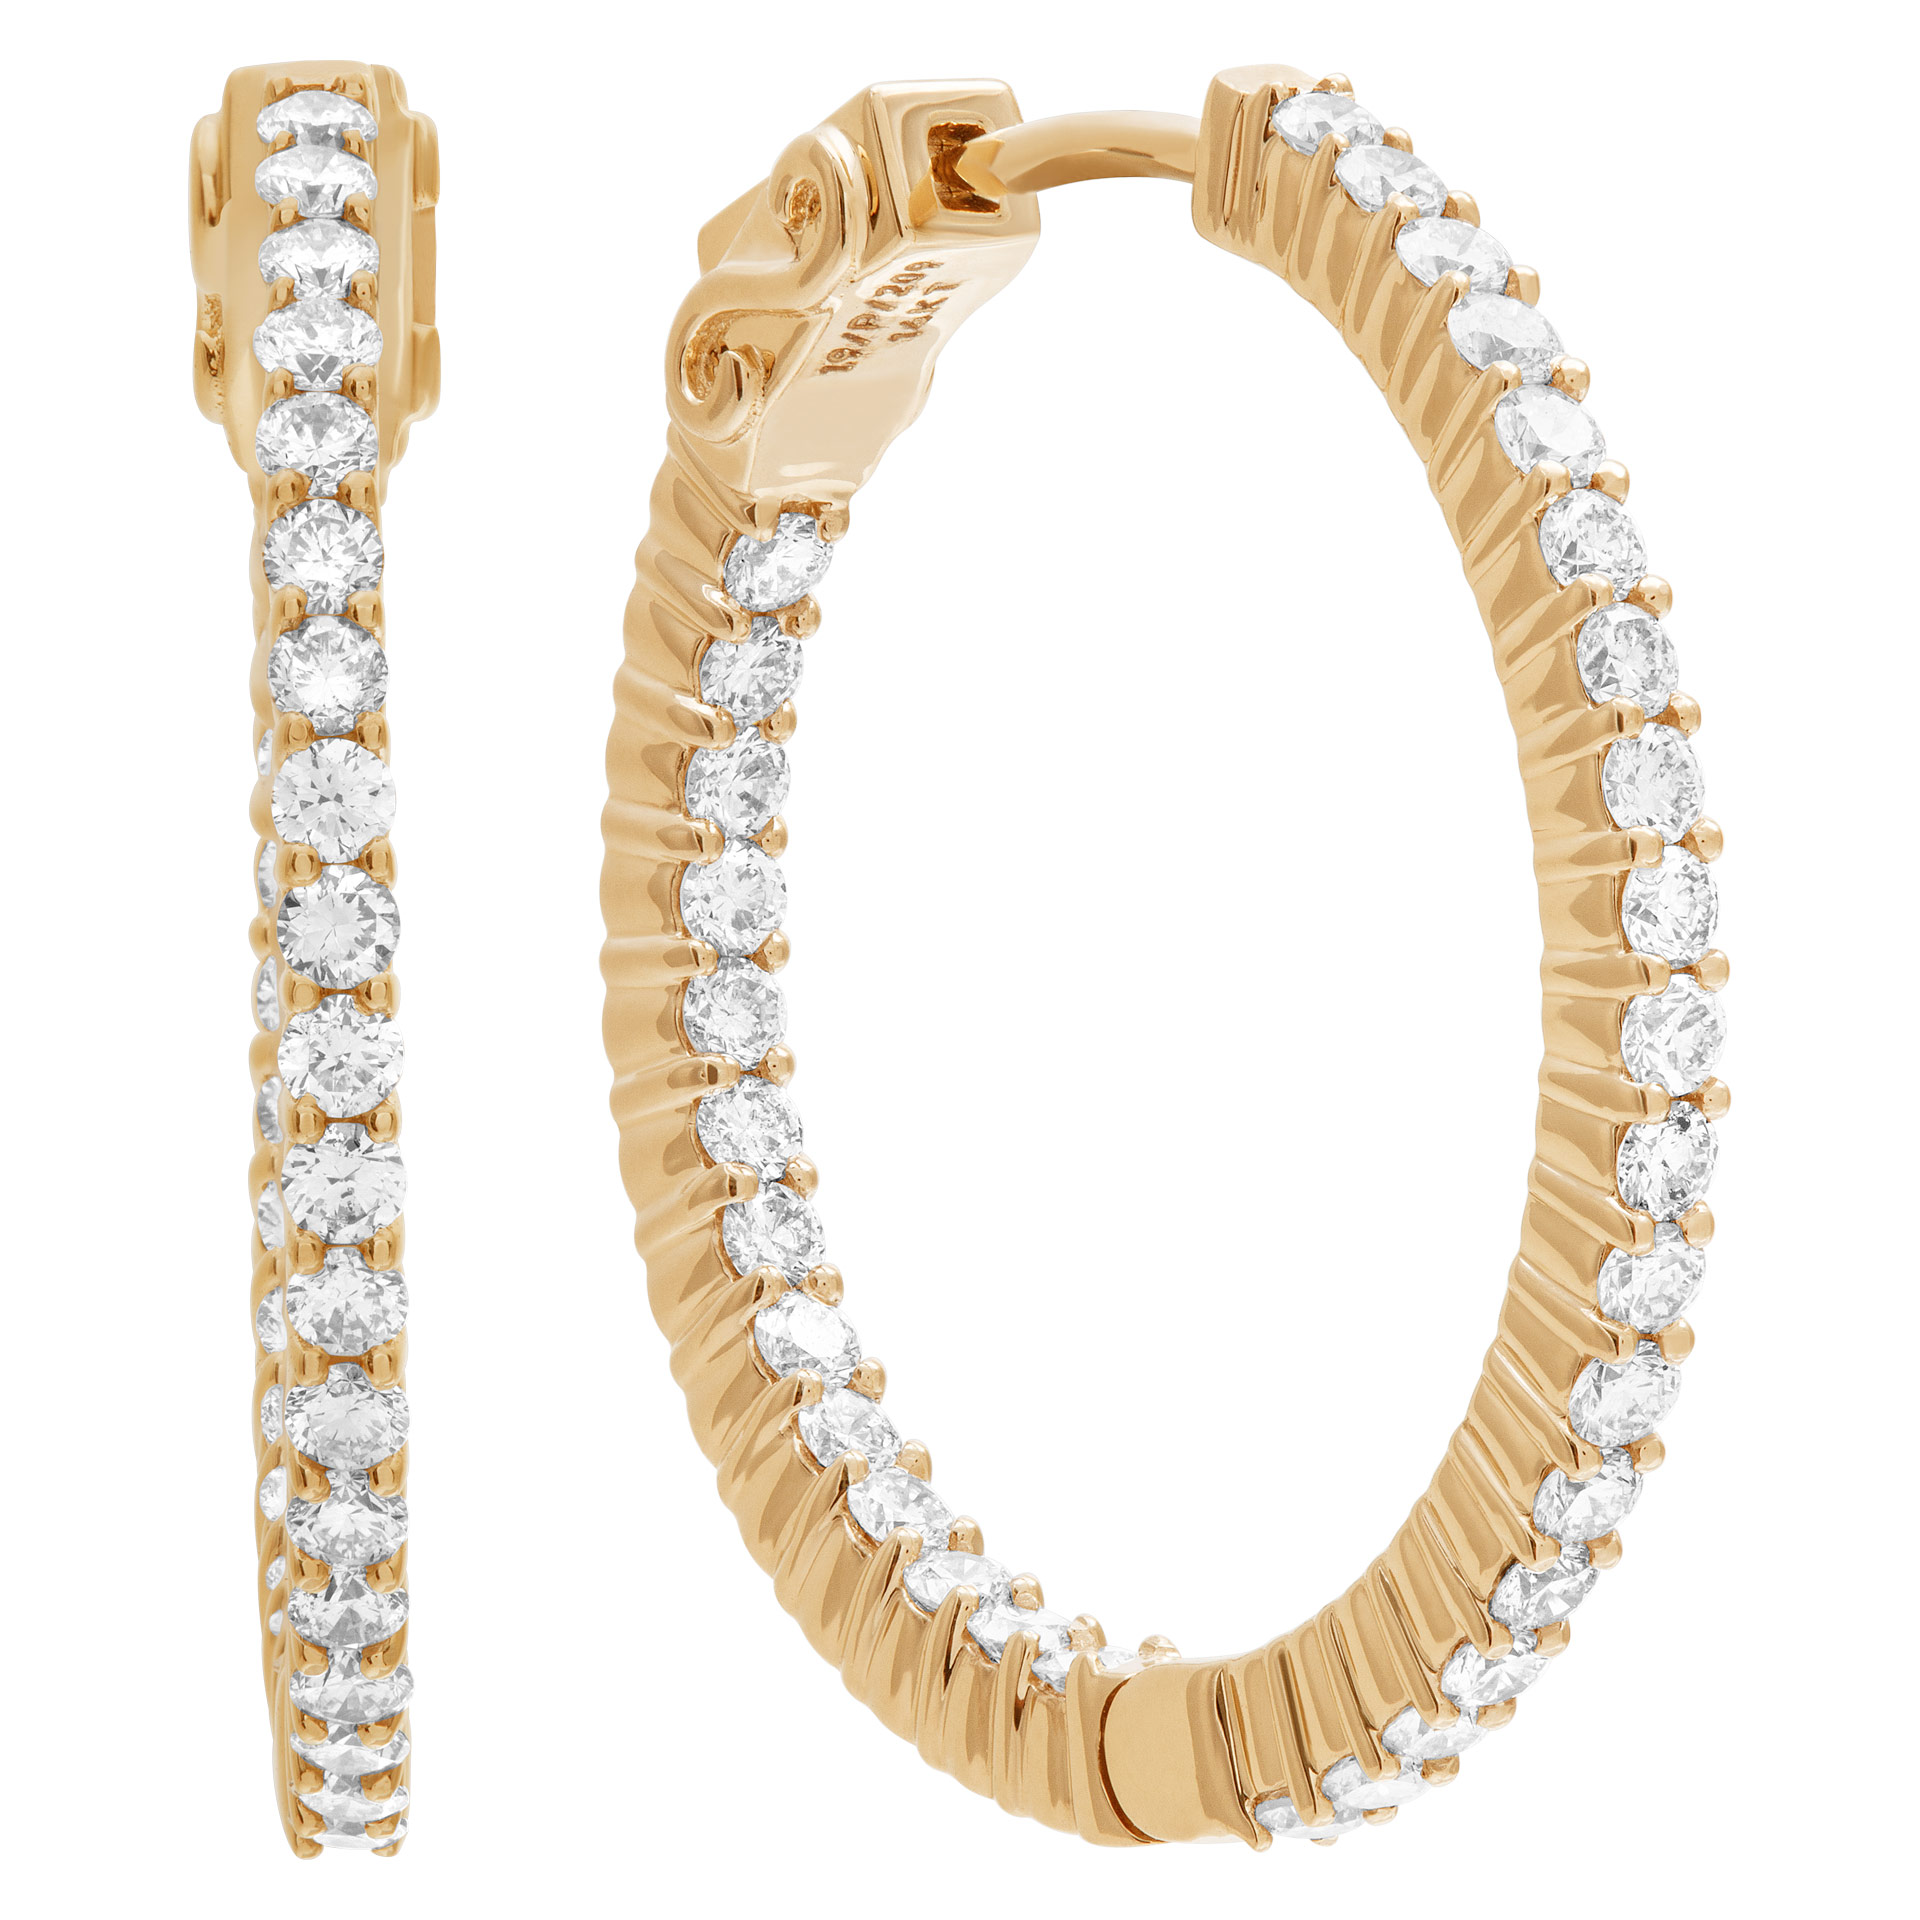 Gorgeous Inside Out Hoop Earrings With 1 66 Carats In Diamonds In 14k